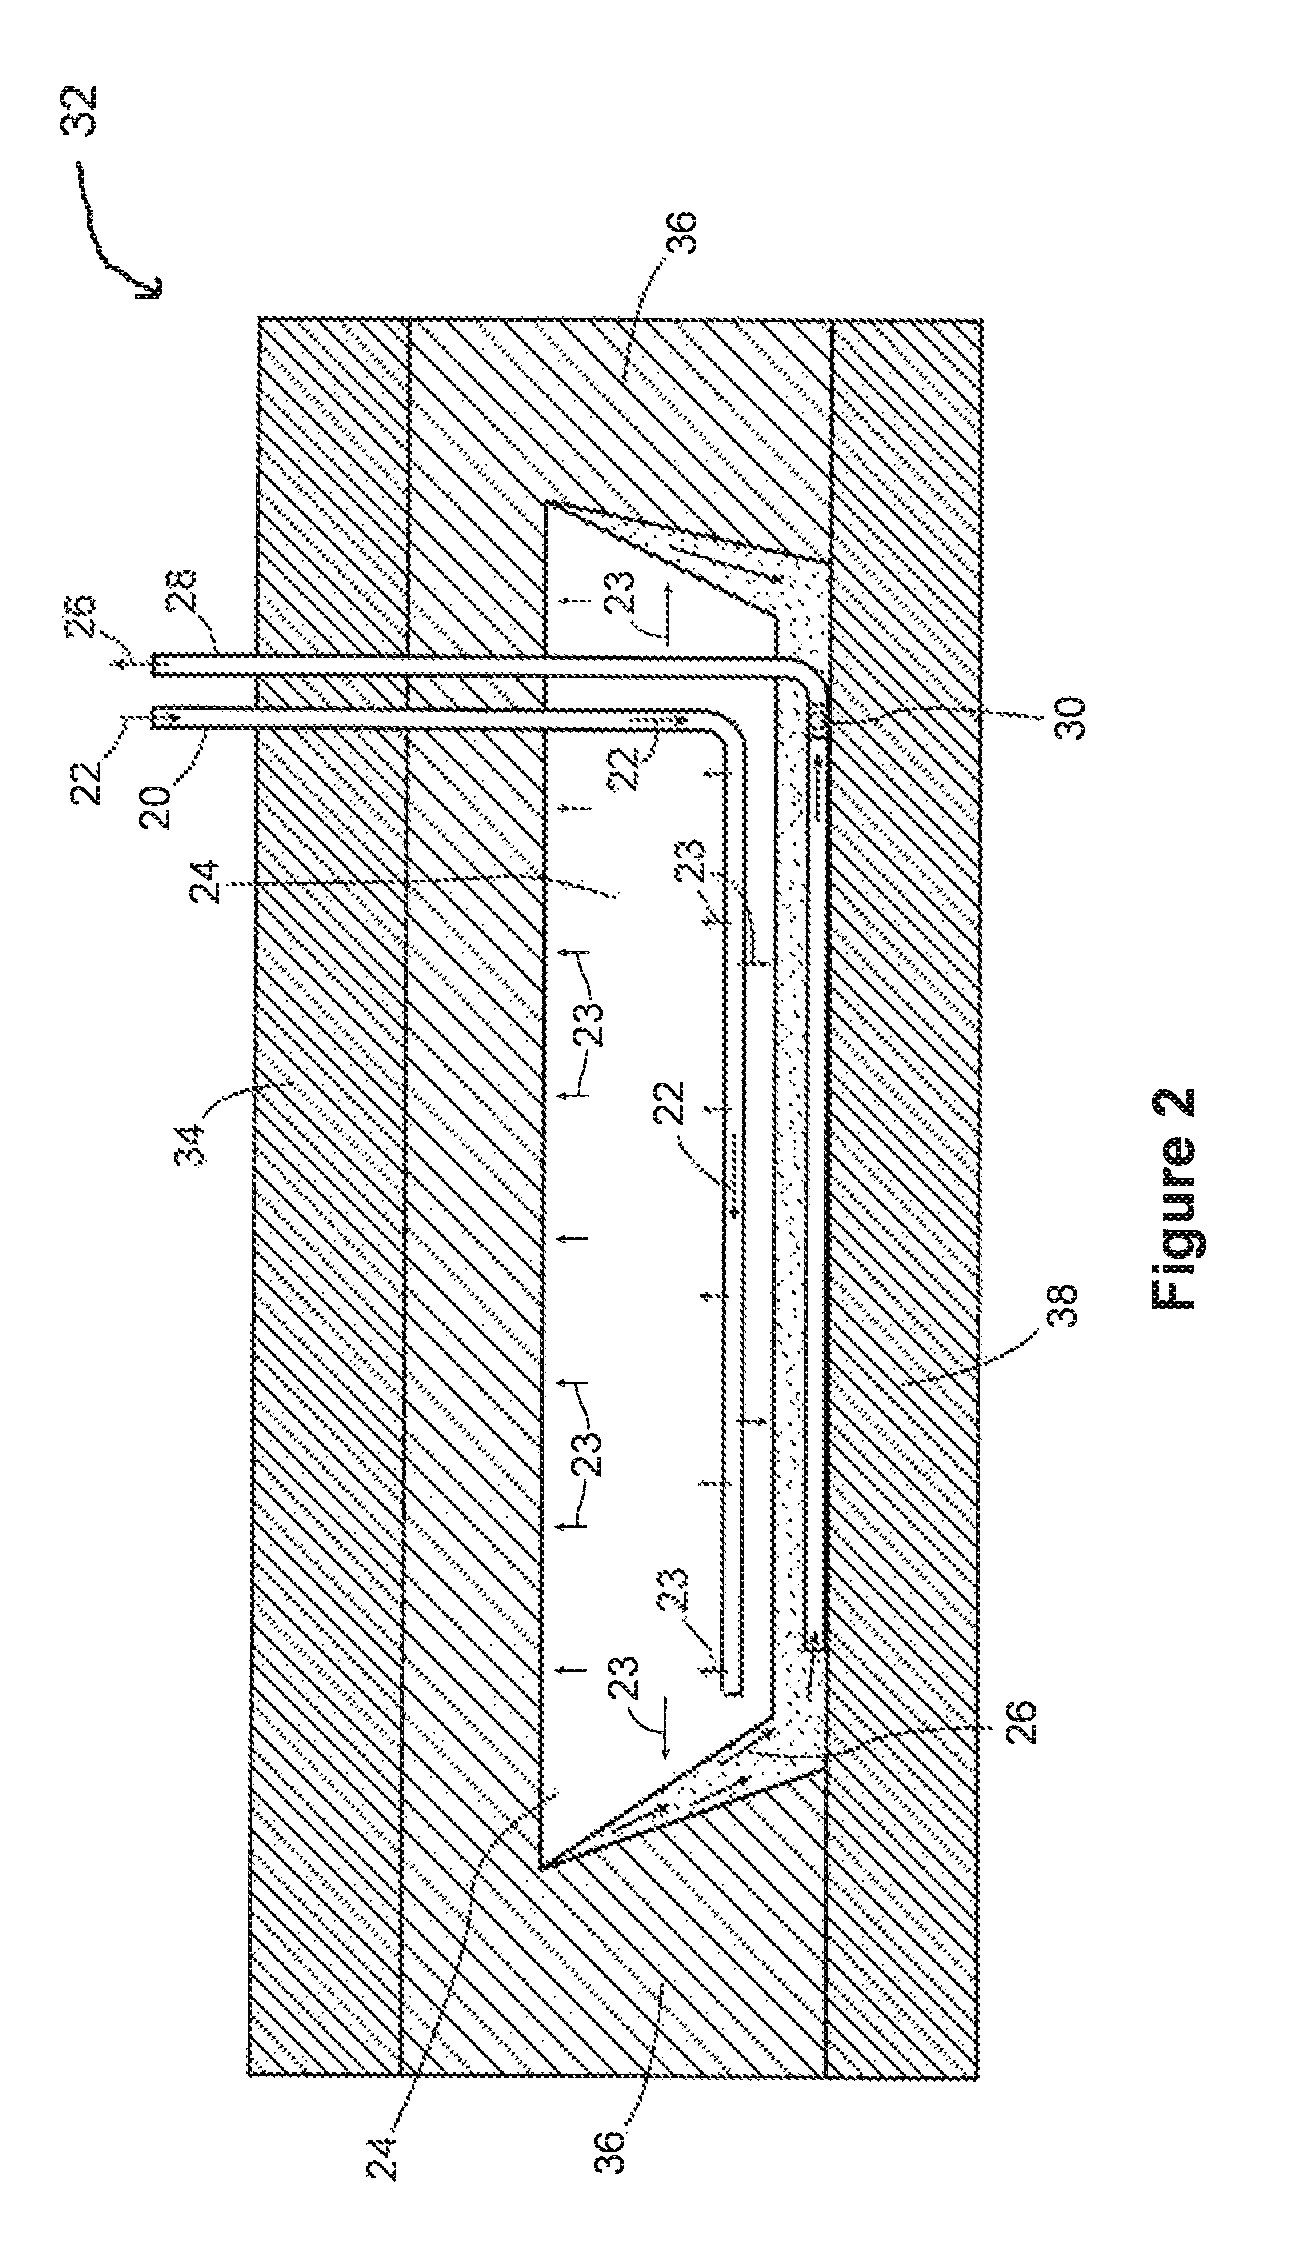 Method of controlling growth and heat loss of an in situ gravity draining chamber formed with a condensing solvent process